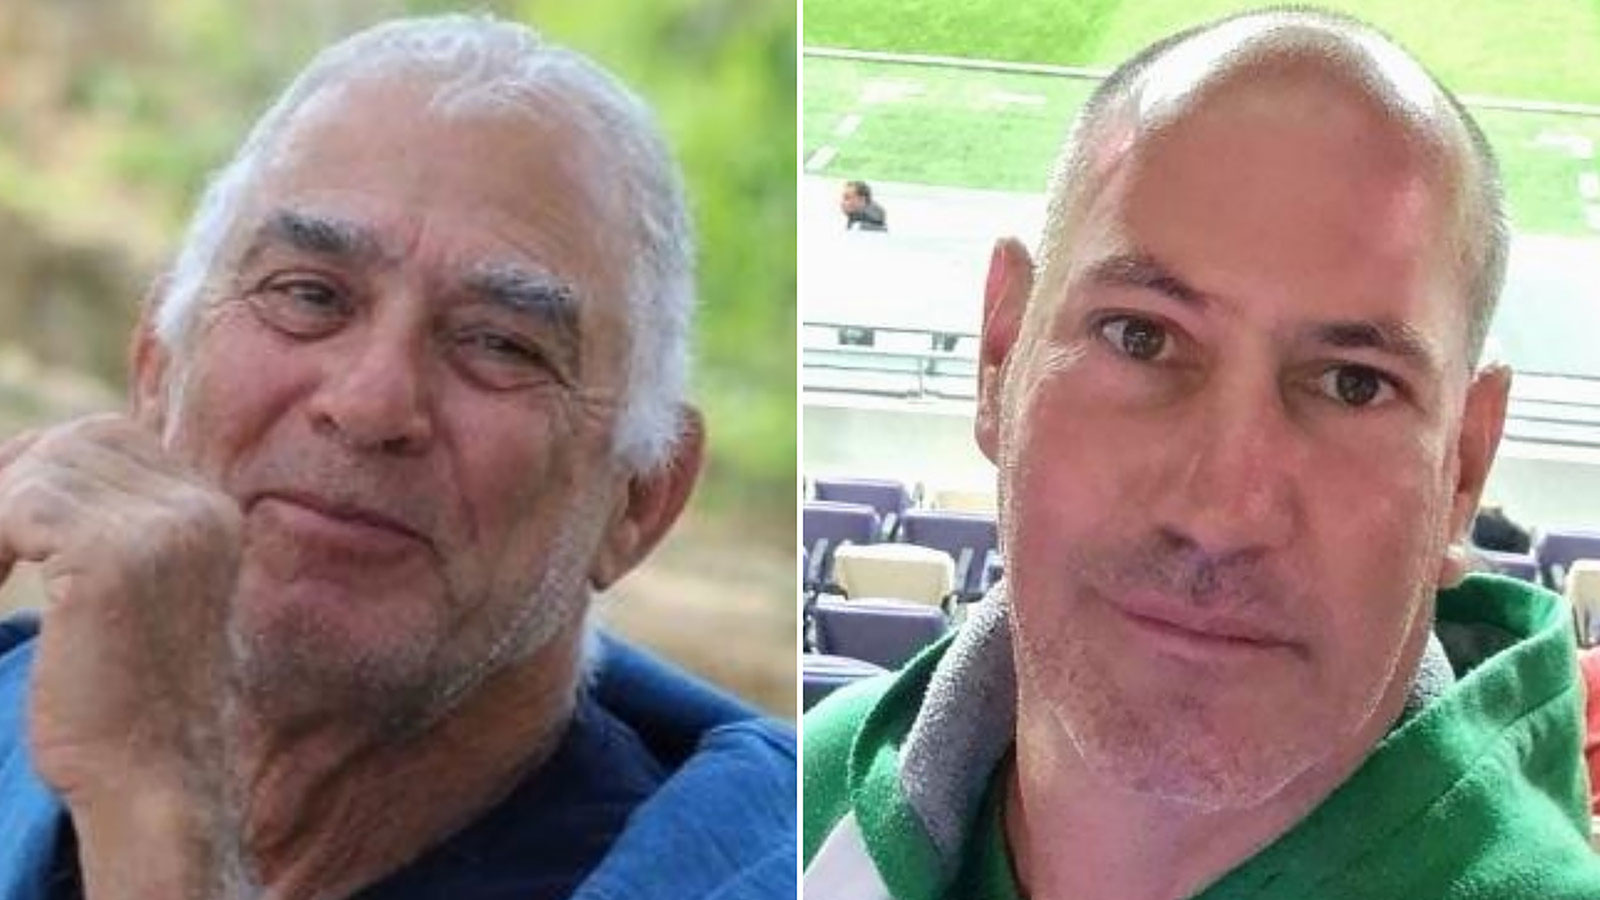 Gadi Moses, 79, and Gadi Katzir, 47, are seen in images taken prior to their kidnapping and released by the Hostages and Missing Families Forum